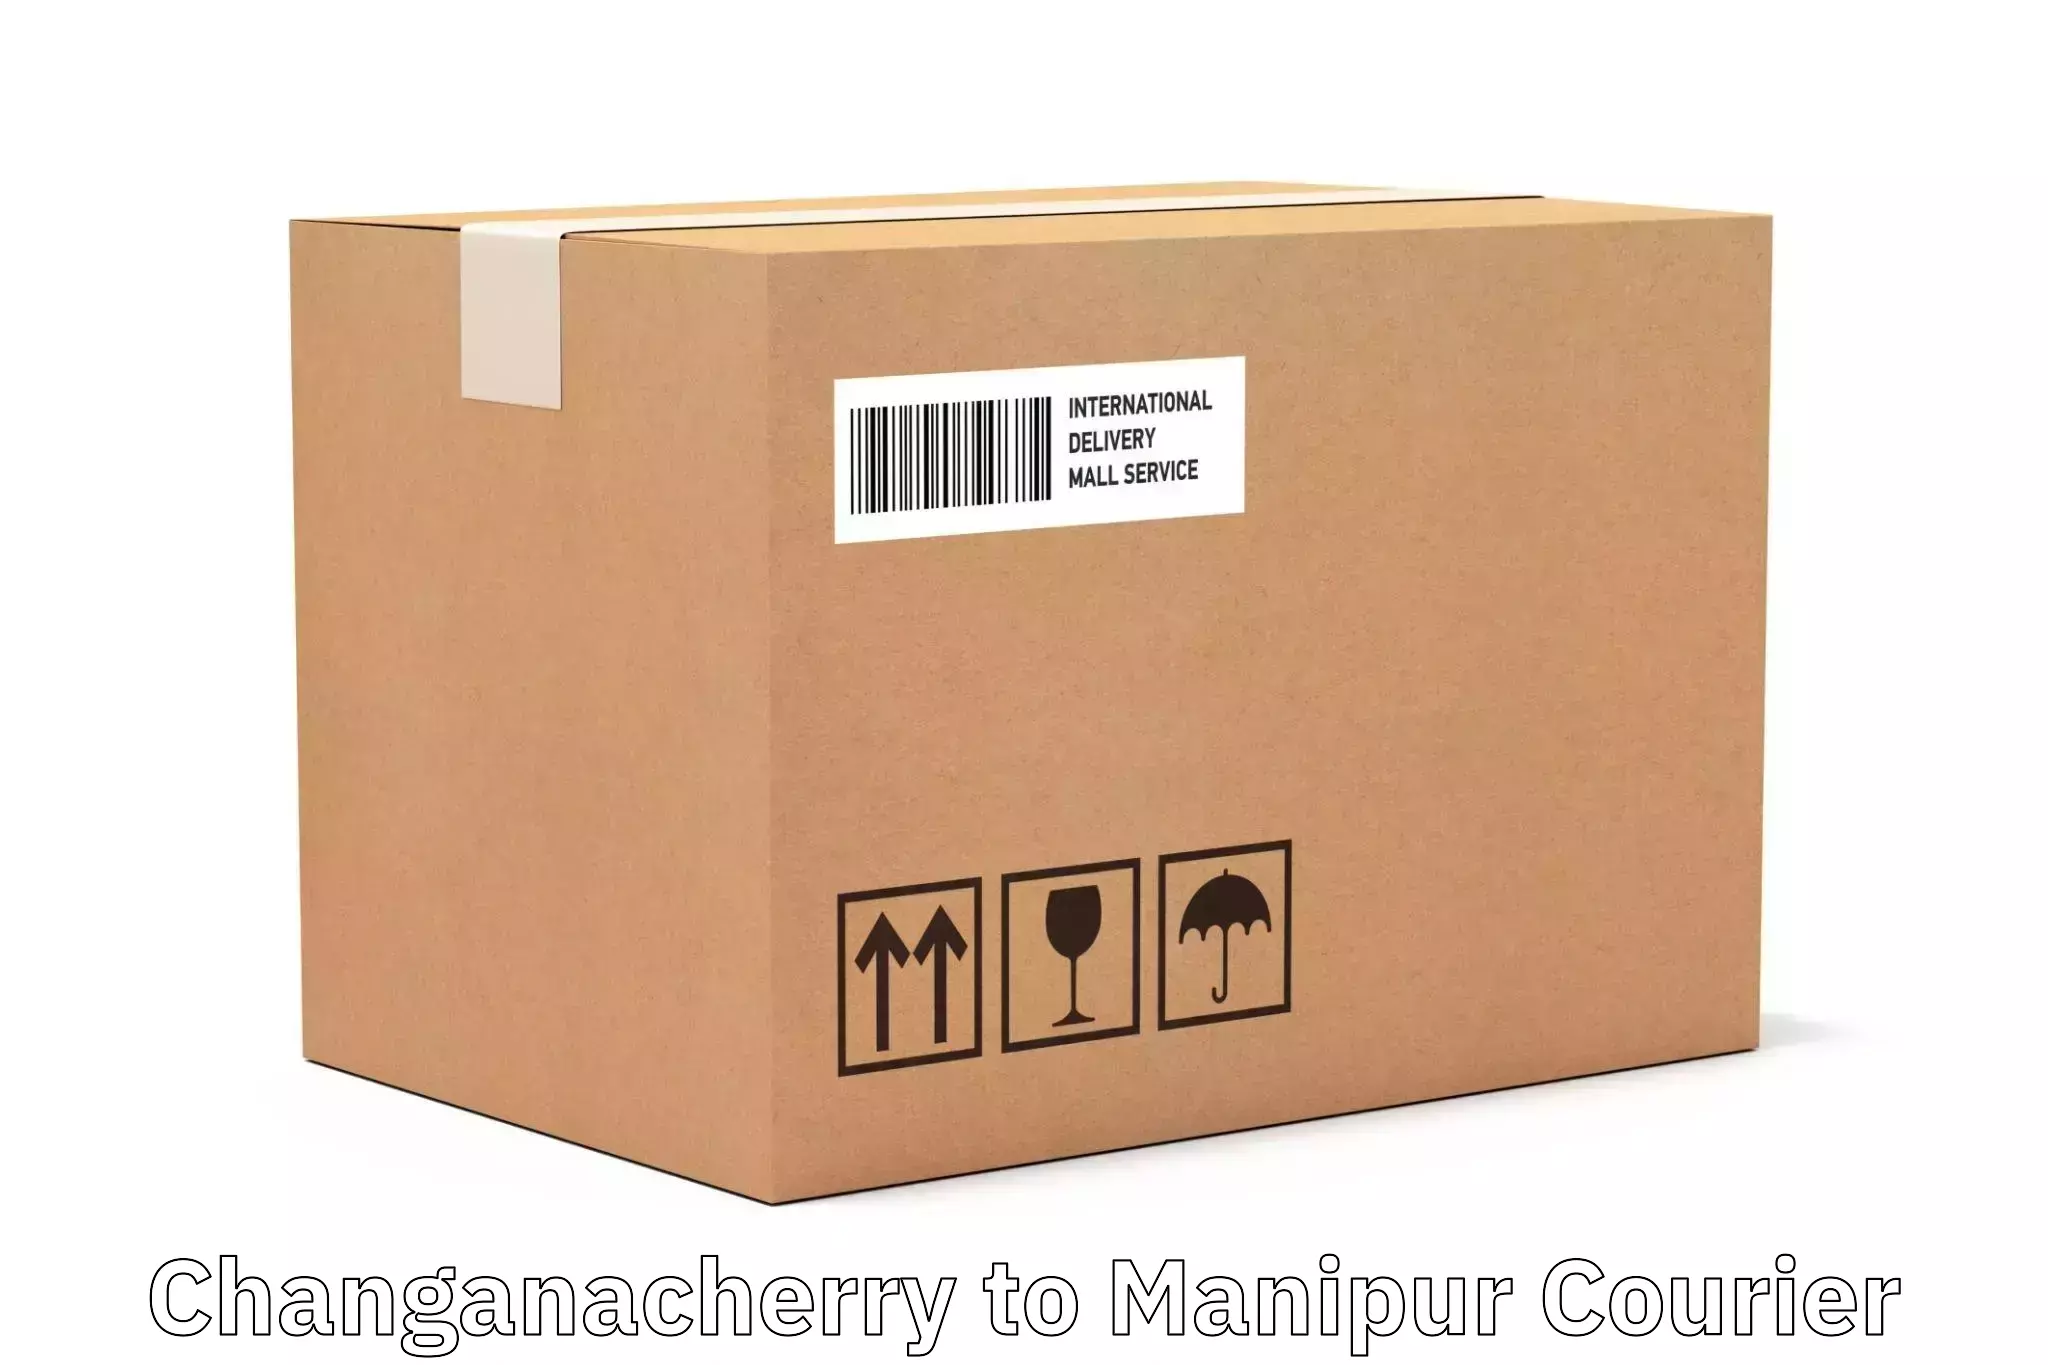 Express delivery capabilities in Changanacherry to Imphal